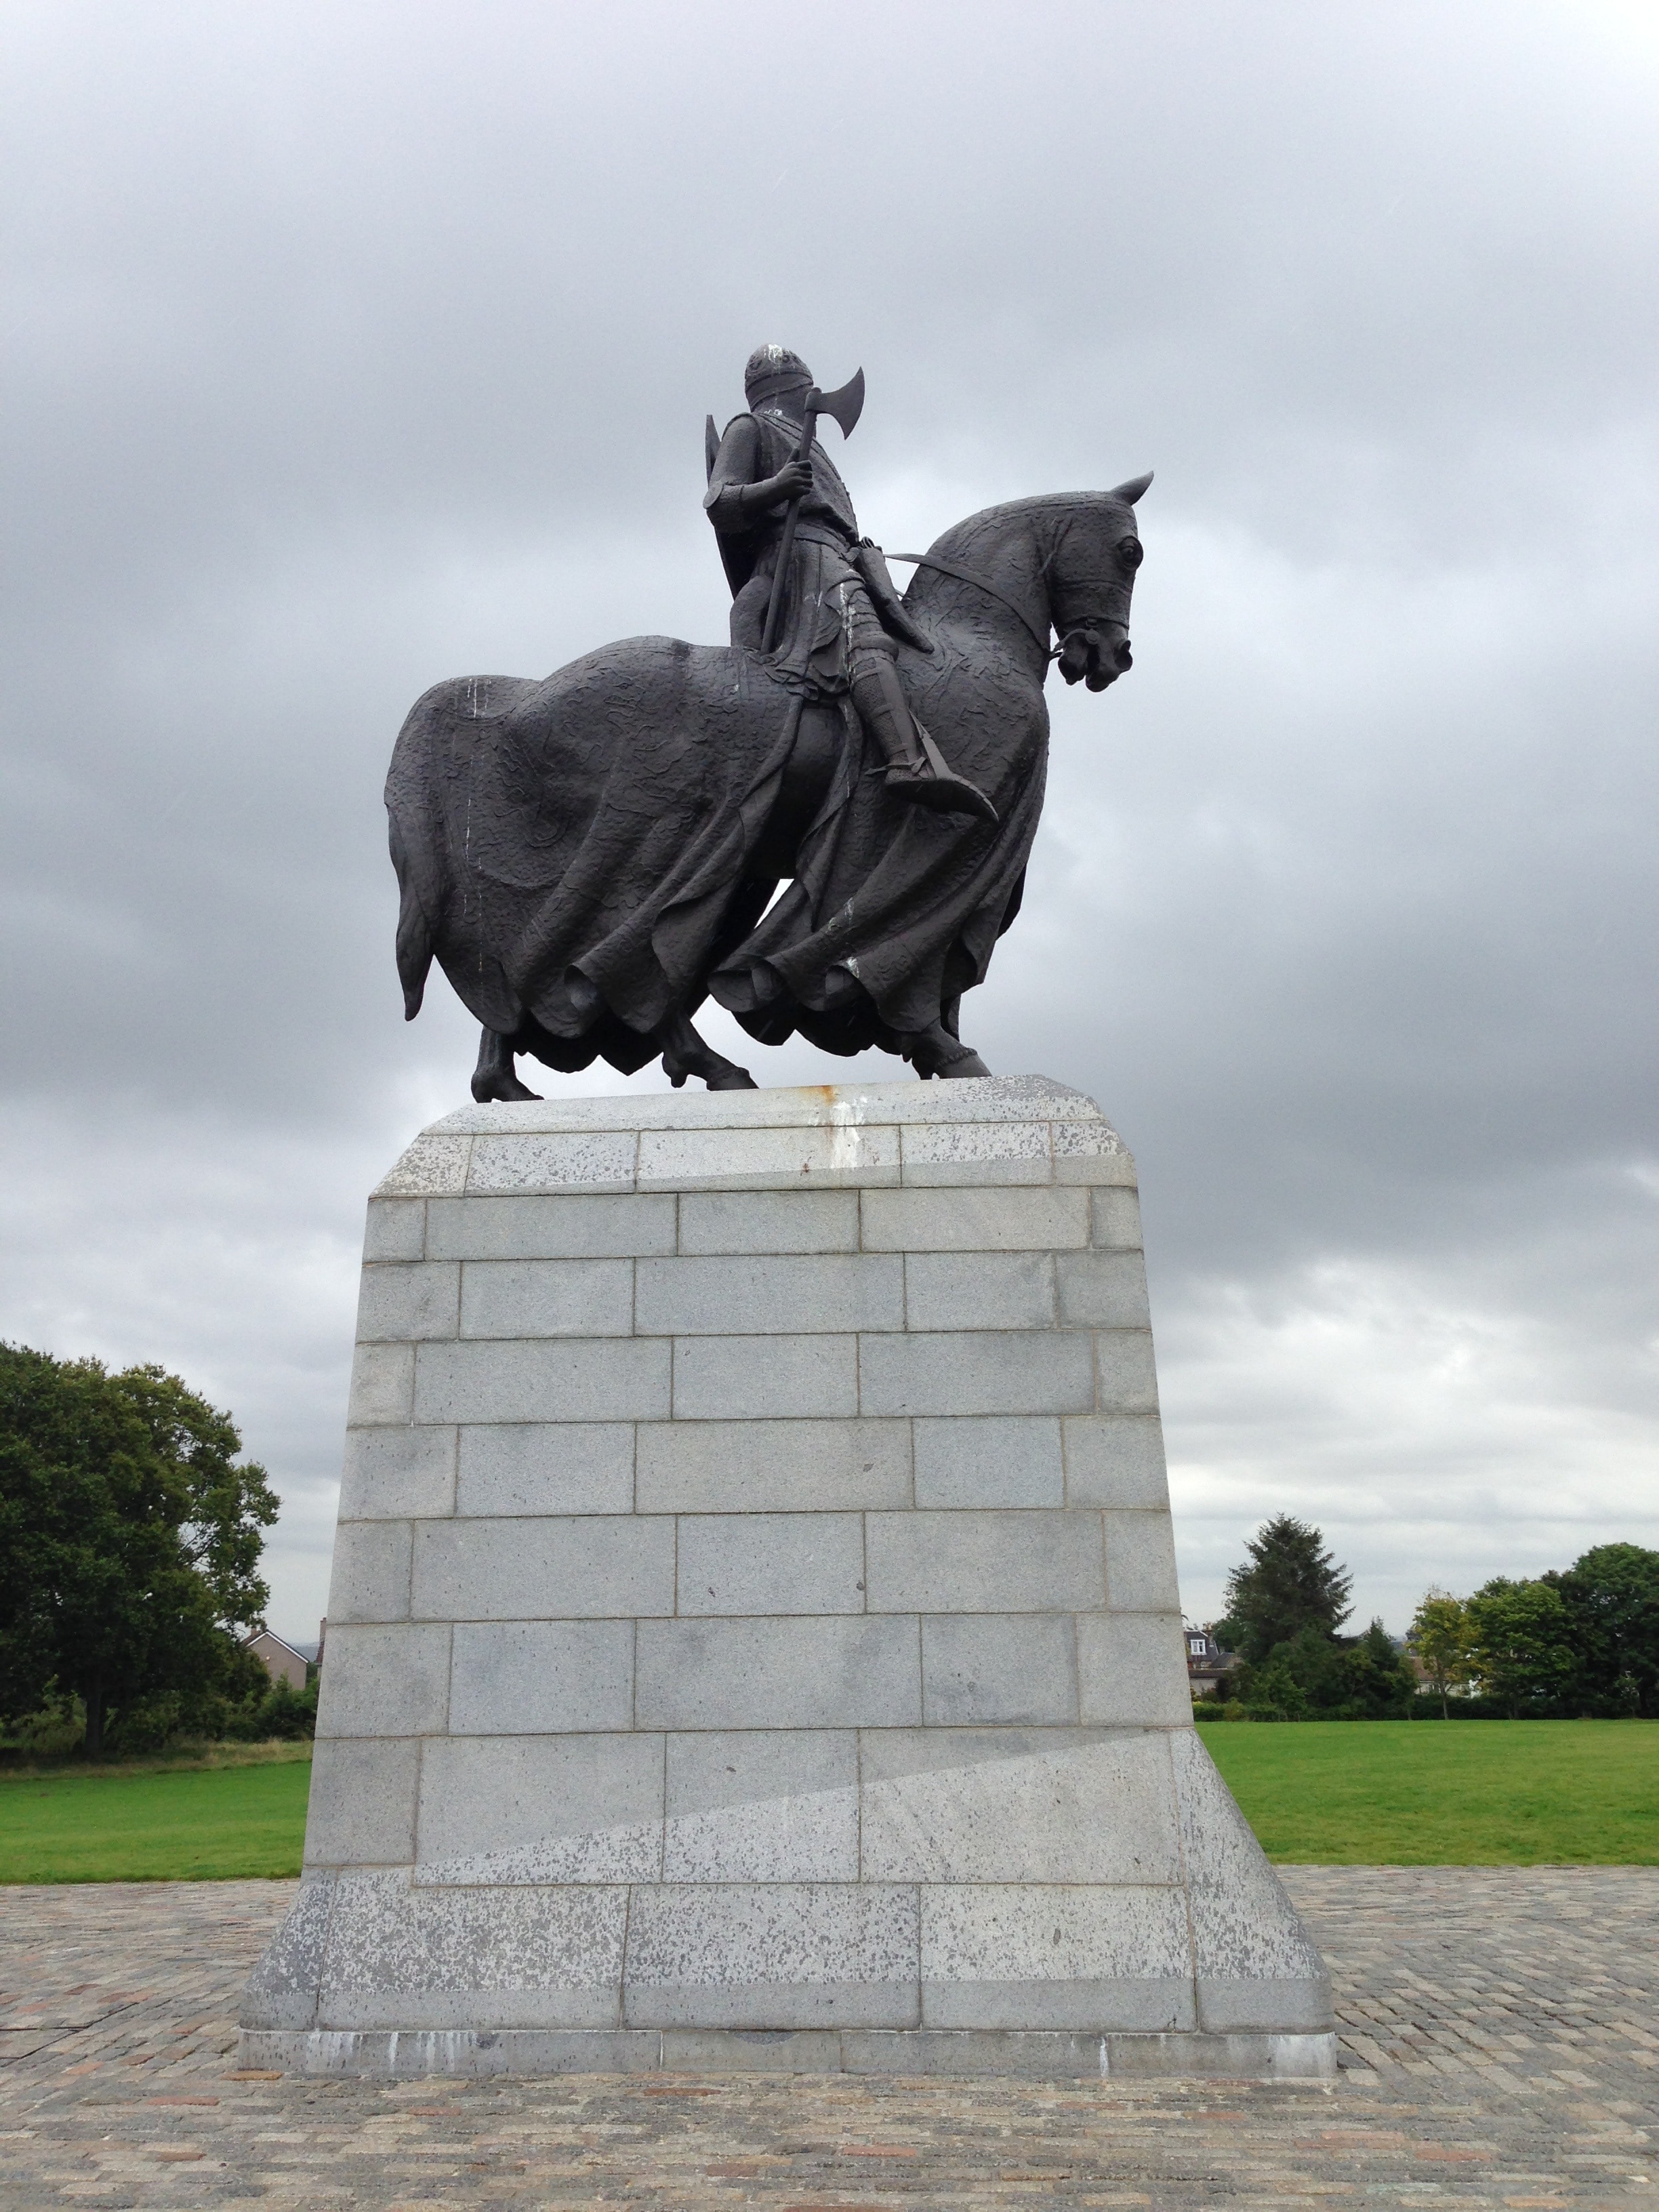 soldier riding horse monument